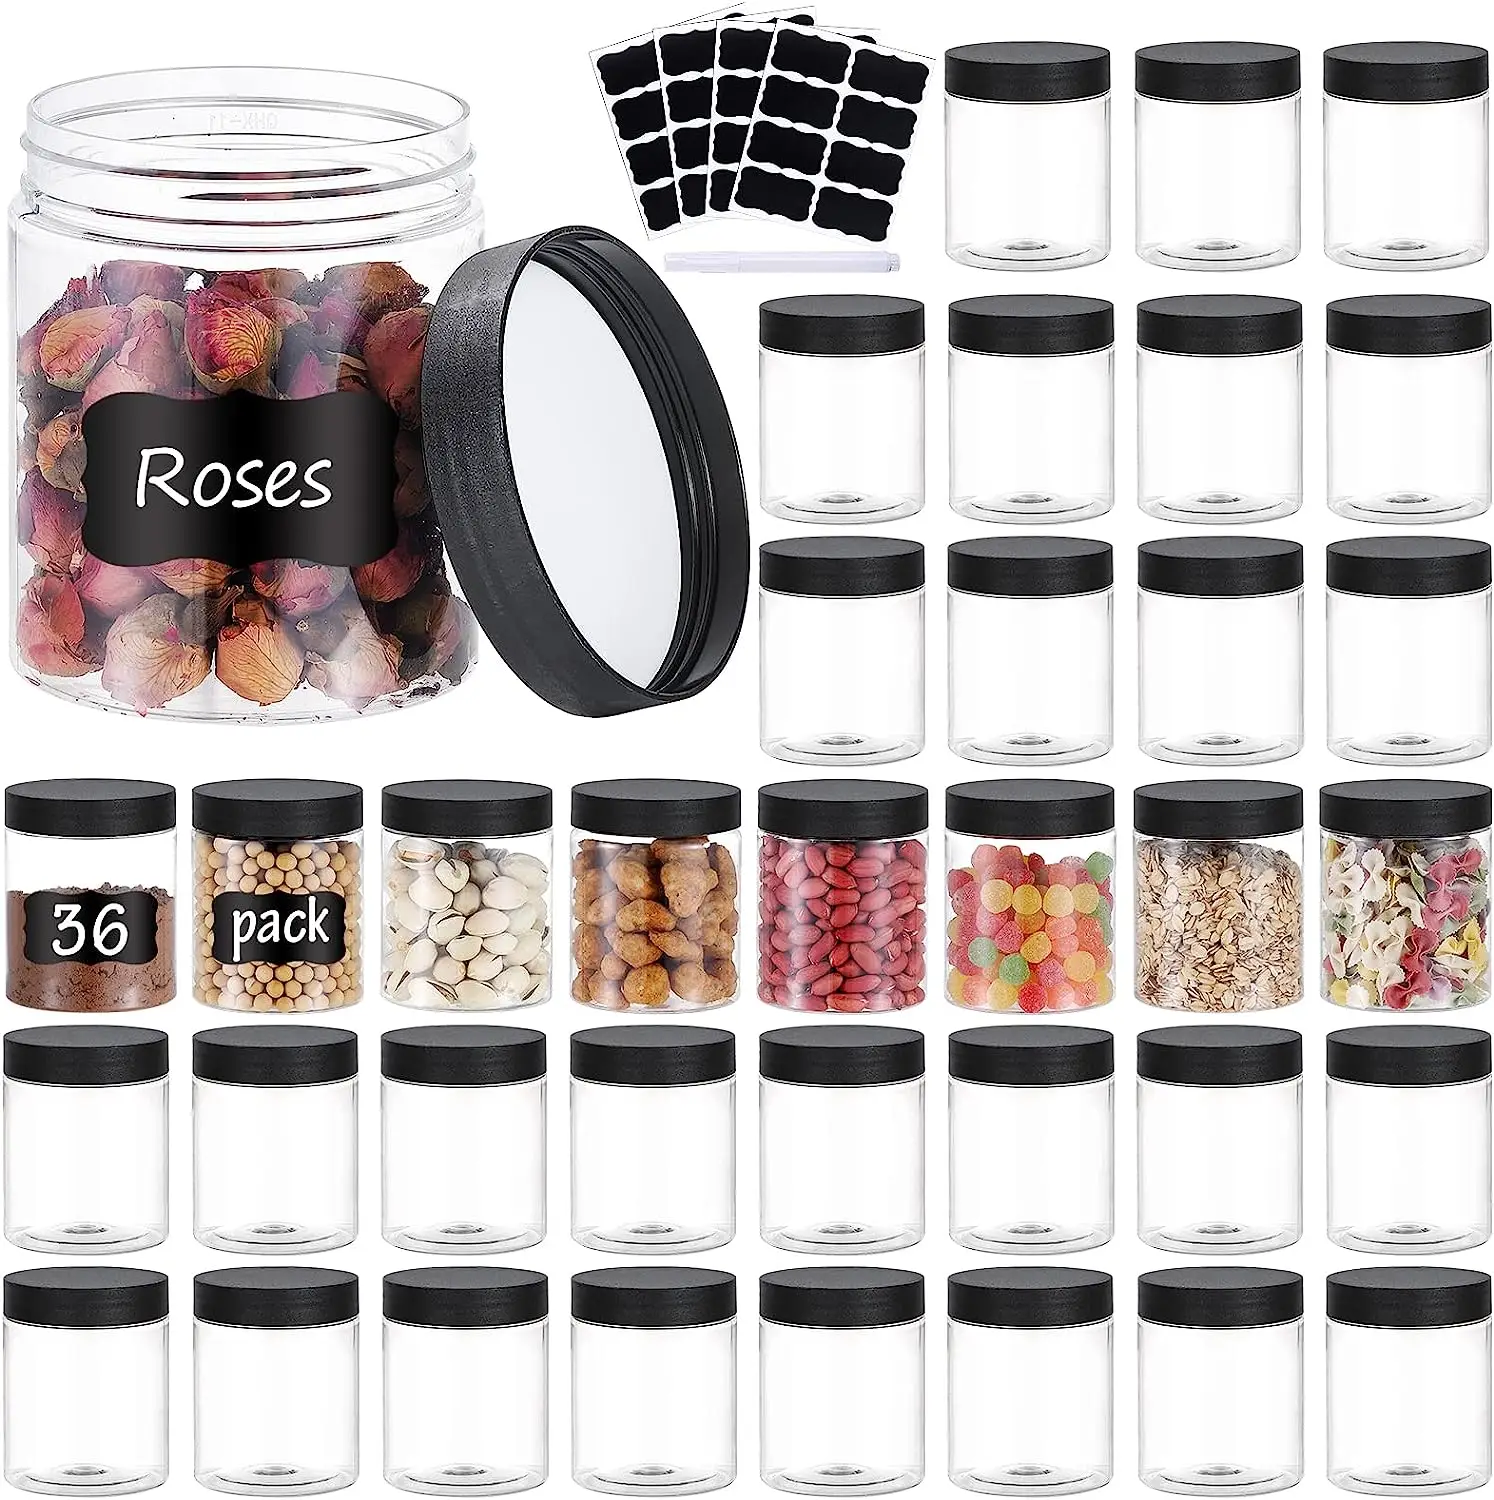 

36PCS 8OZ Plastic Jars with Screw On Lids, Pen and Labels Refillable Empty Round Slime Cosmetics Containers for Storing